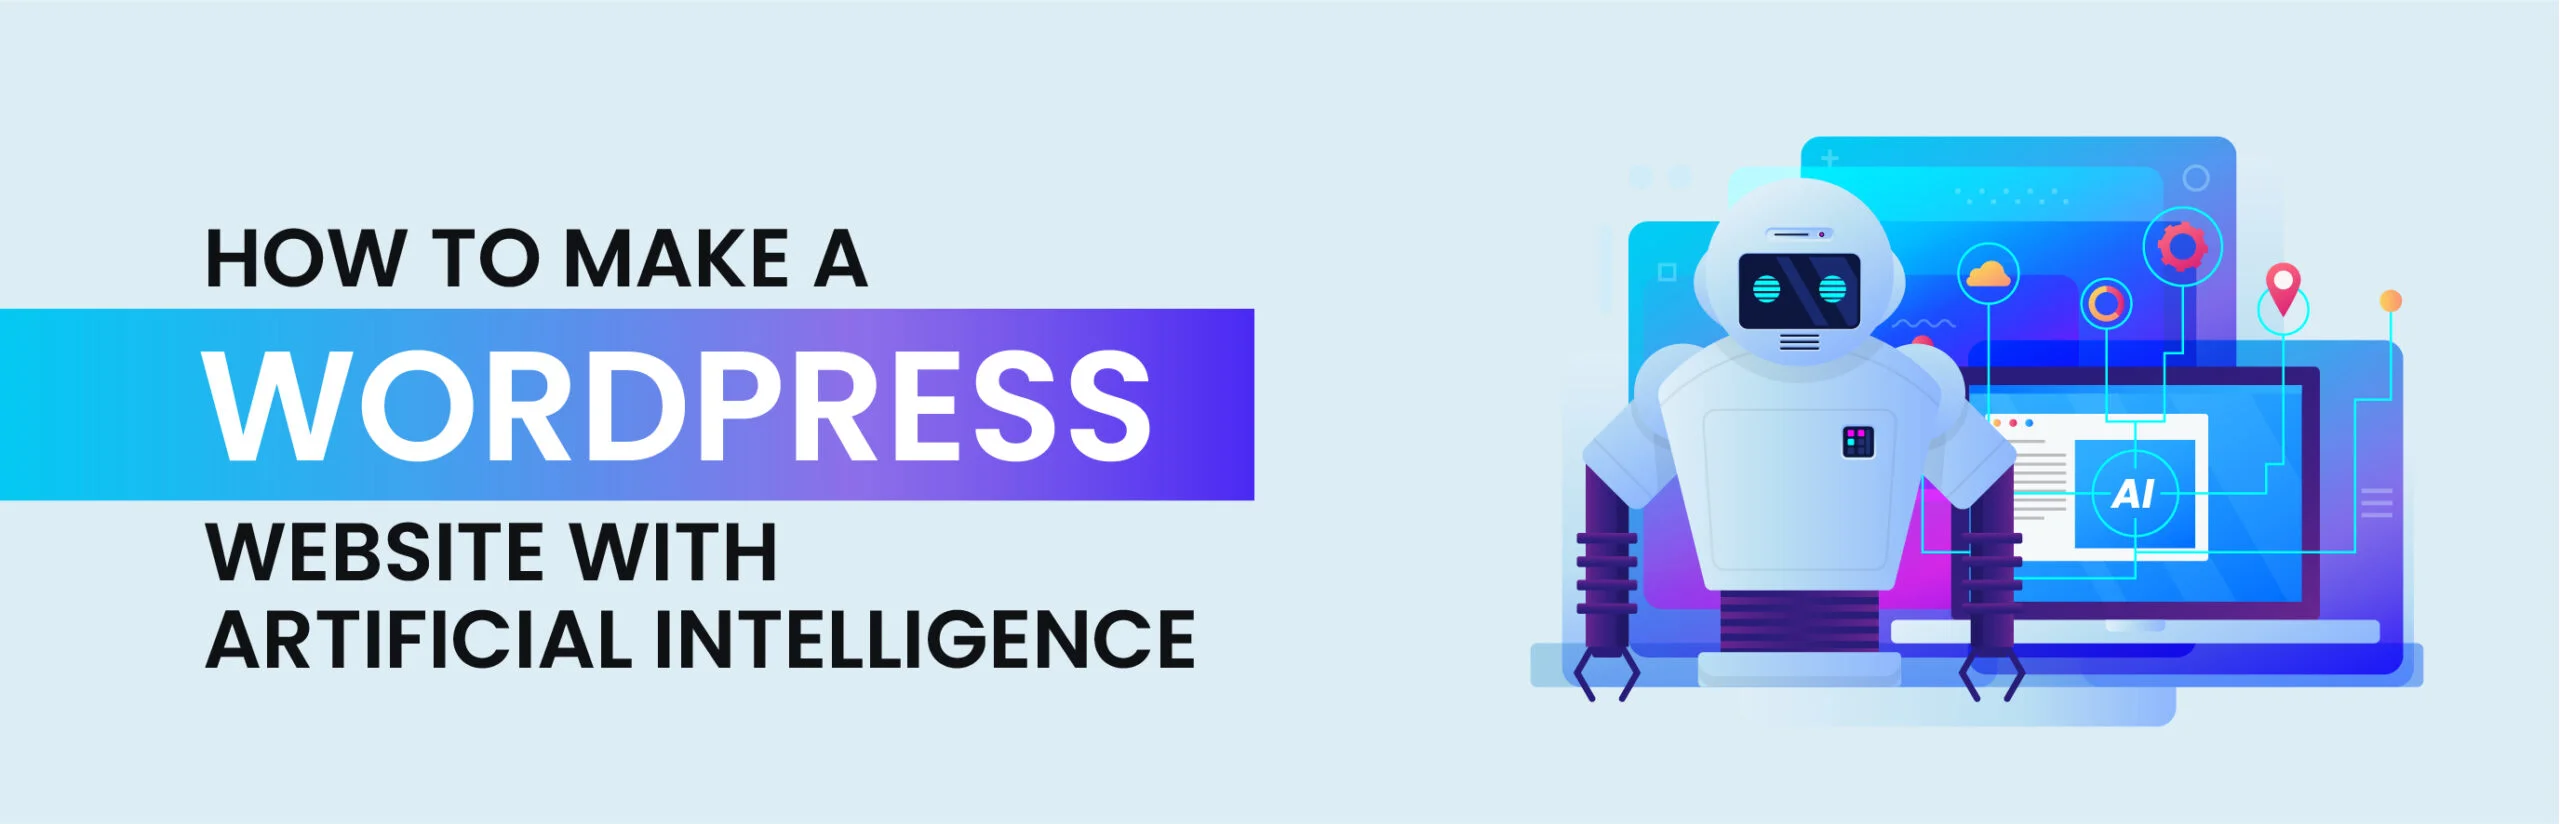 How to Make a WordPress Website With Artificial Intelligence